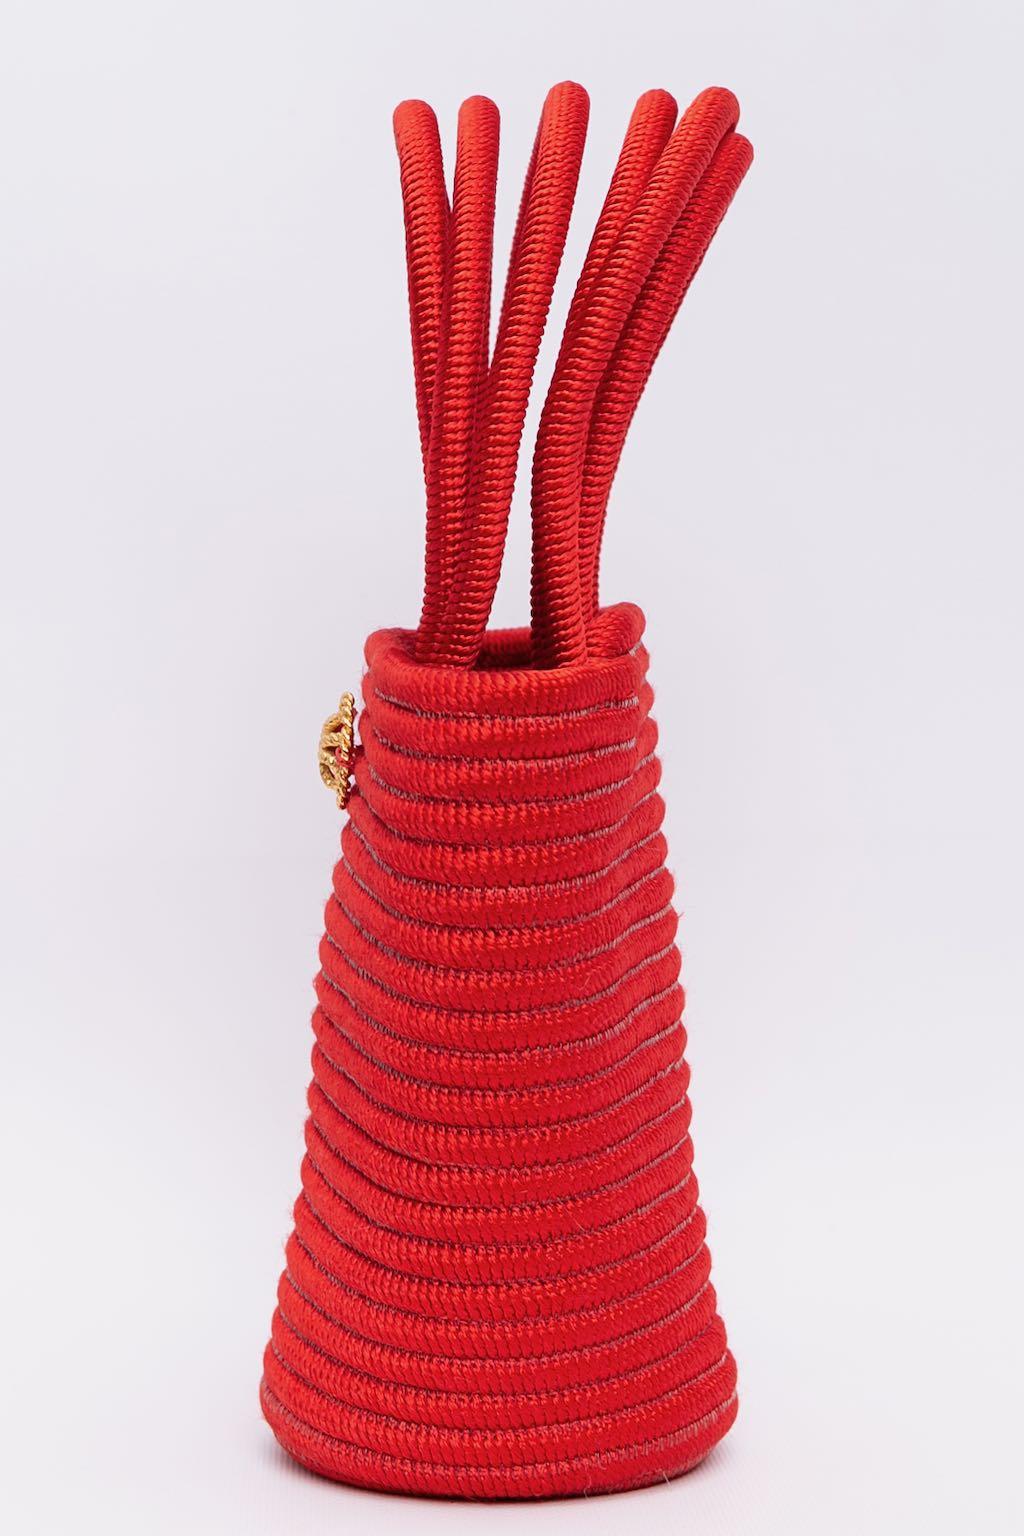 Nina Ricci (Made in France) Red passementerie bag.

Additional information: 

Dimensions: 
Length: 20 cm (7.87